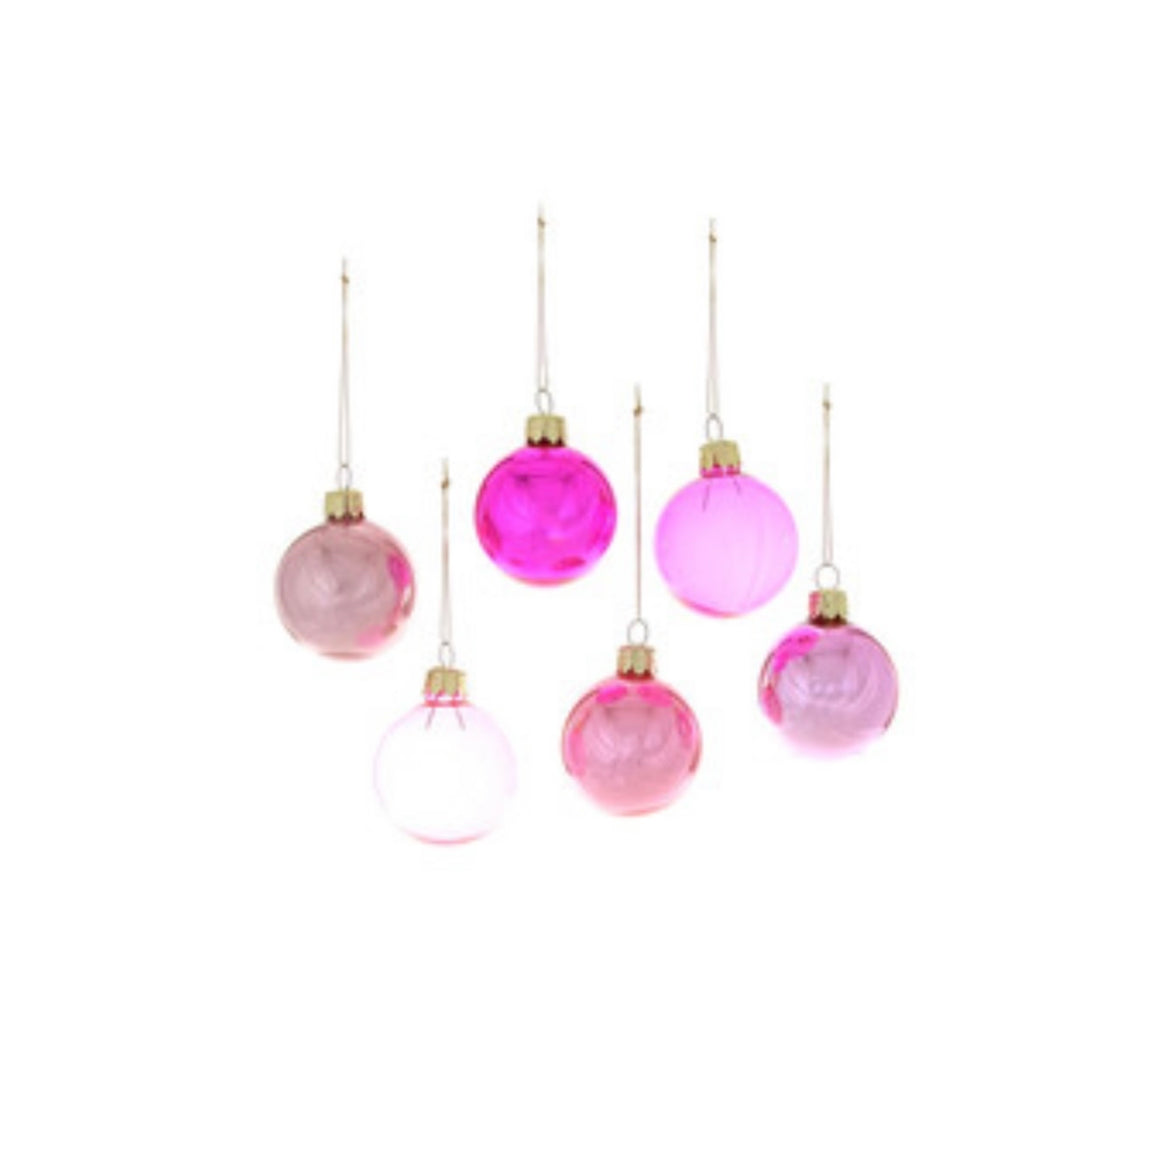 HEIRLOOM GLASS ORNAMENTS - CODY FOSTER SMALL PINK HUE BAUBLES (set of 6)